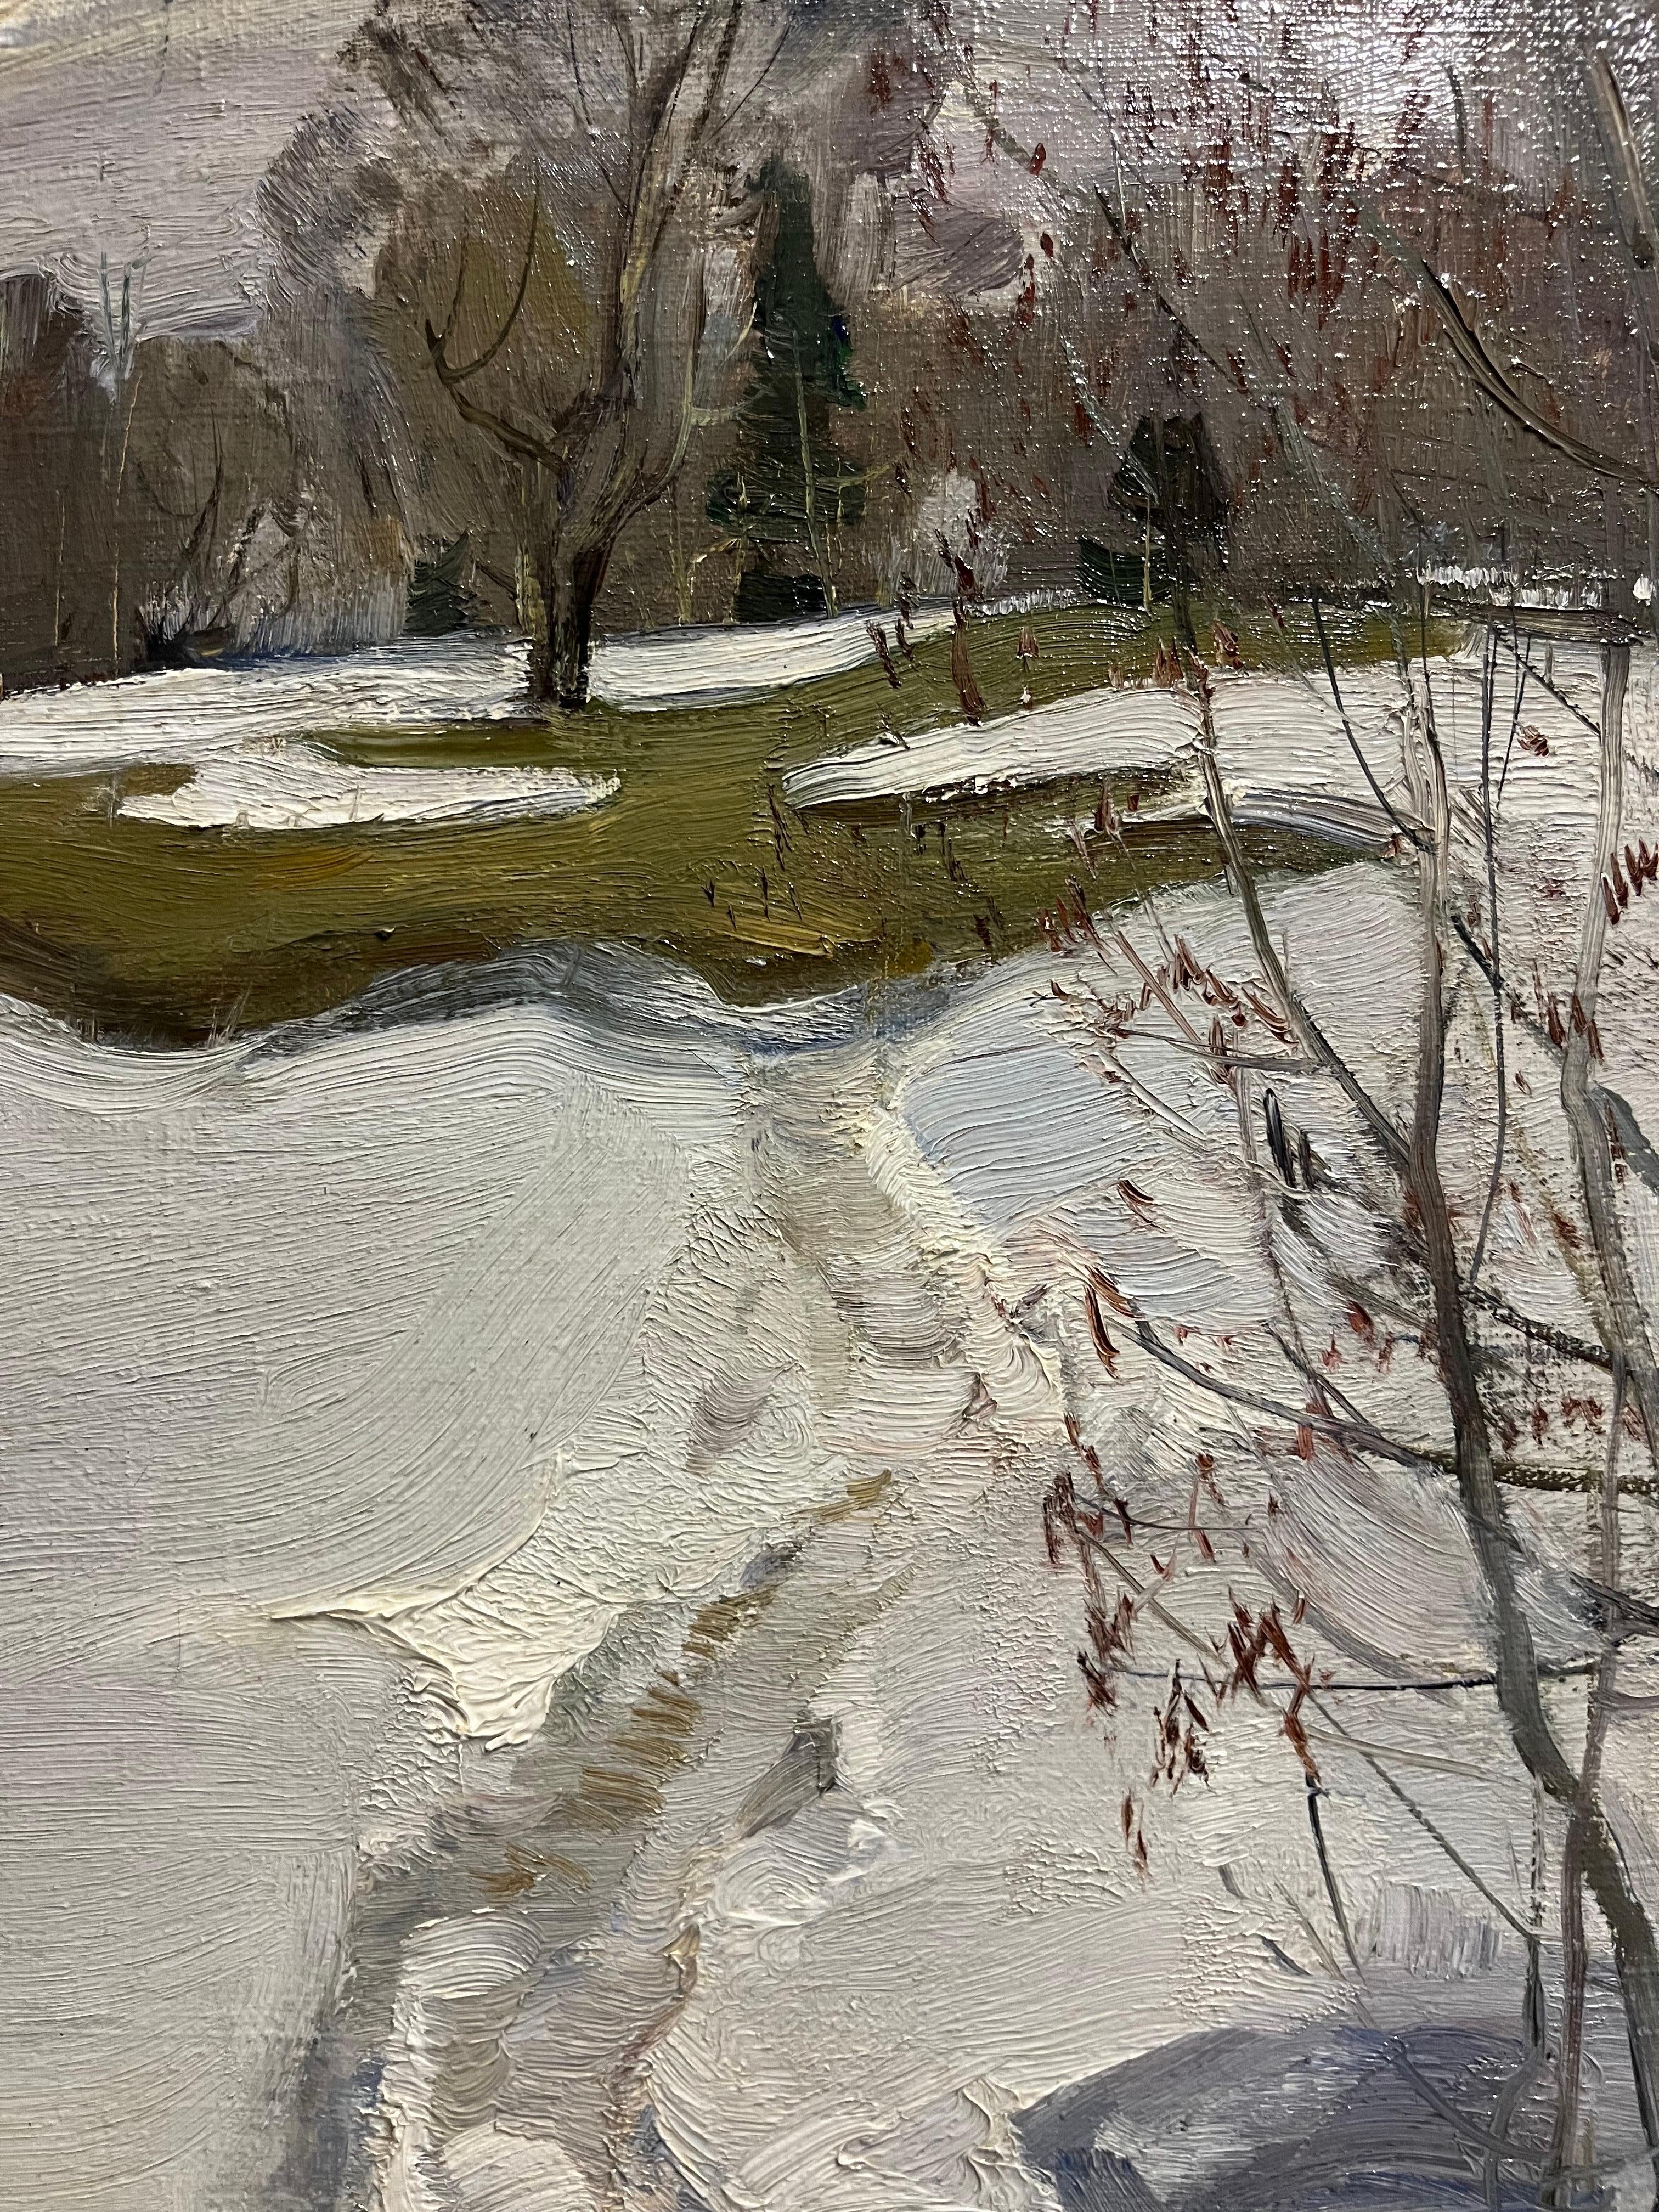 Snow,woods,withe,grey
LEONID VAICHLIA  (St. Petersburg, 1922)

Works by Leonid Vaichlia can be found in various private collections in Europe, Japan, United States and in the following museums:


Mosca, The Ministry of Culture Collection
Mosca,